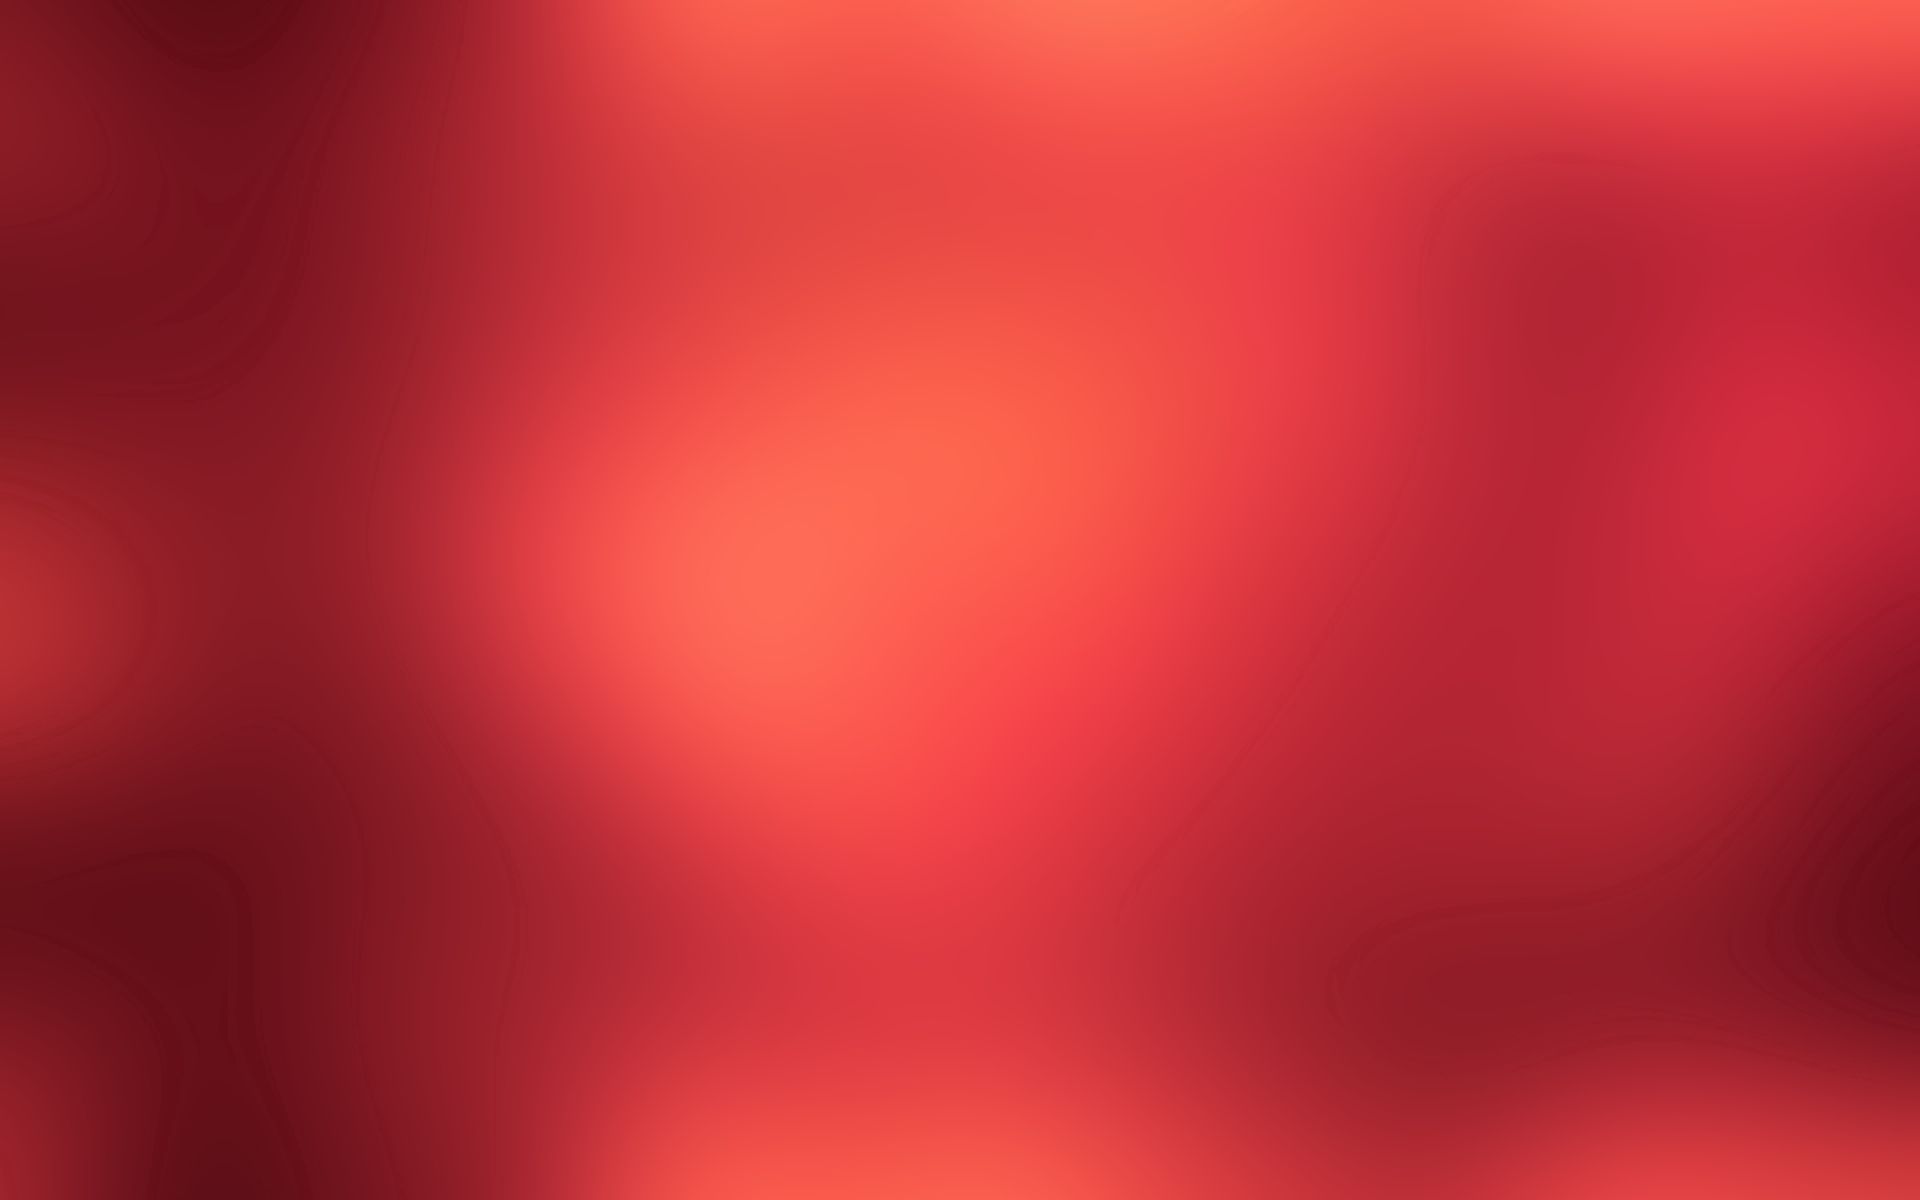 android solid, bright, abstract, red, shine, brilliance